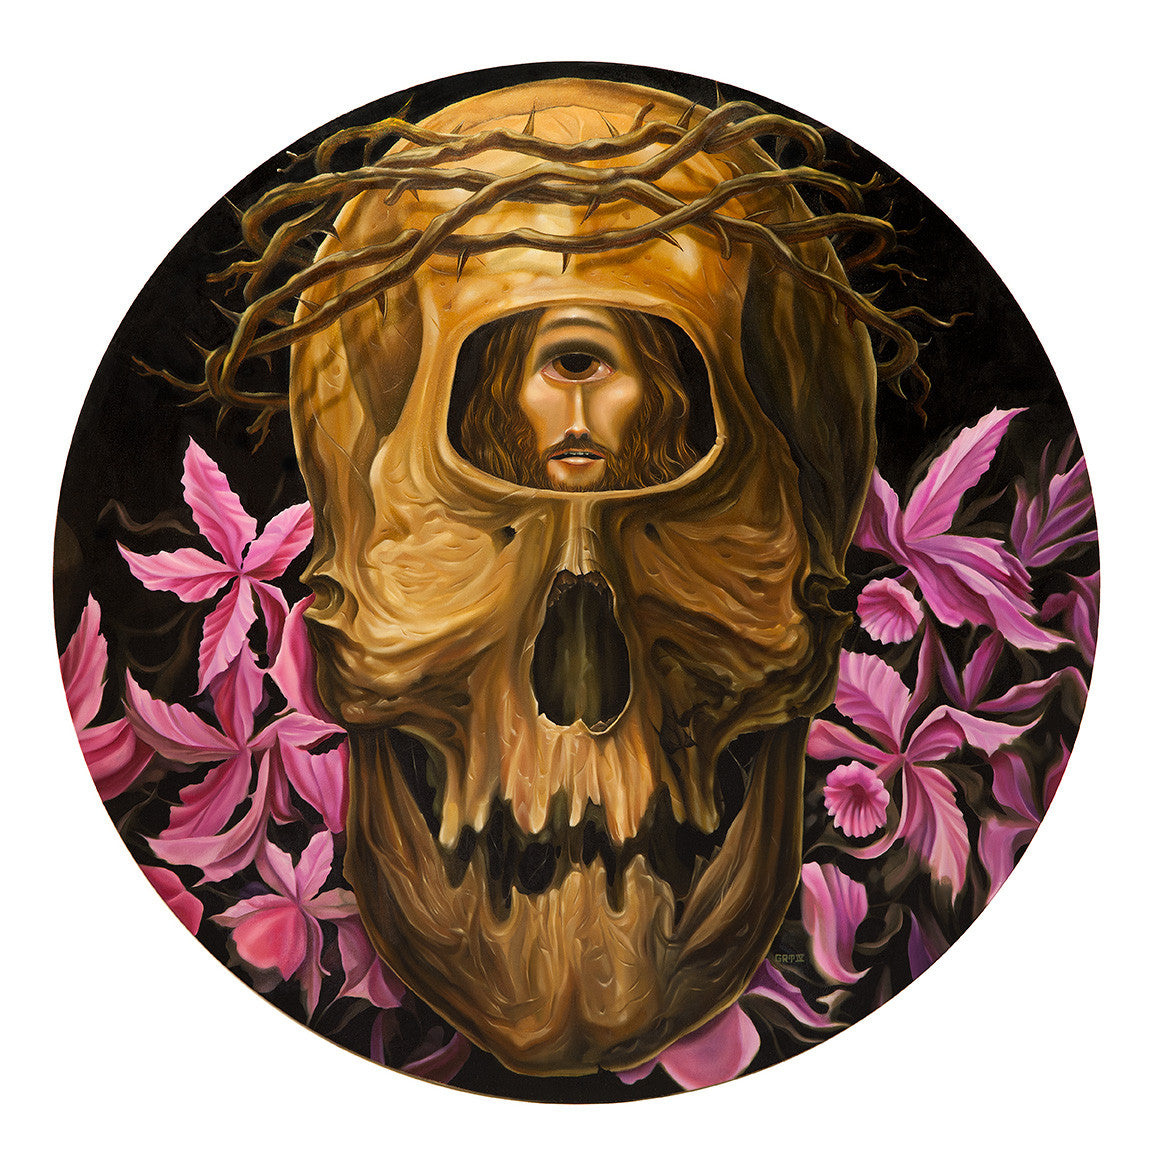 George R. Thompson IV: Still Life with Cyclops, Skull, Flowers, and Jesus